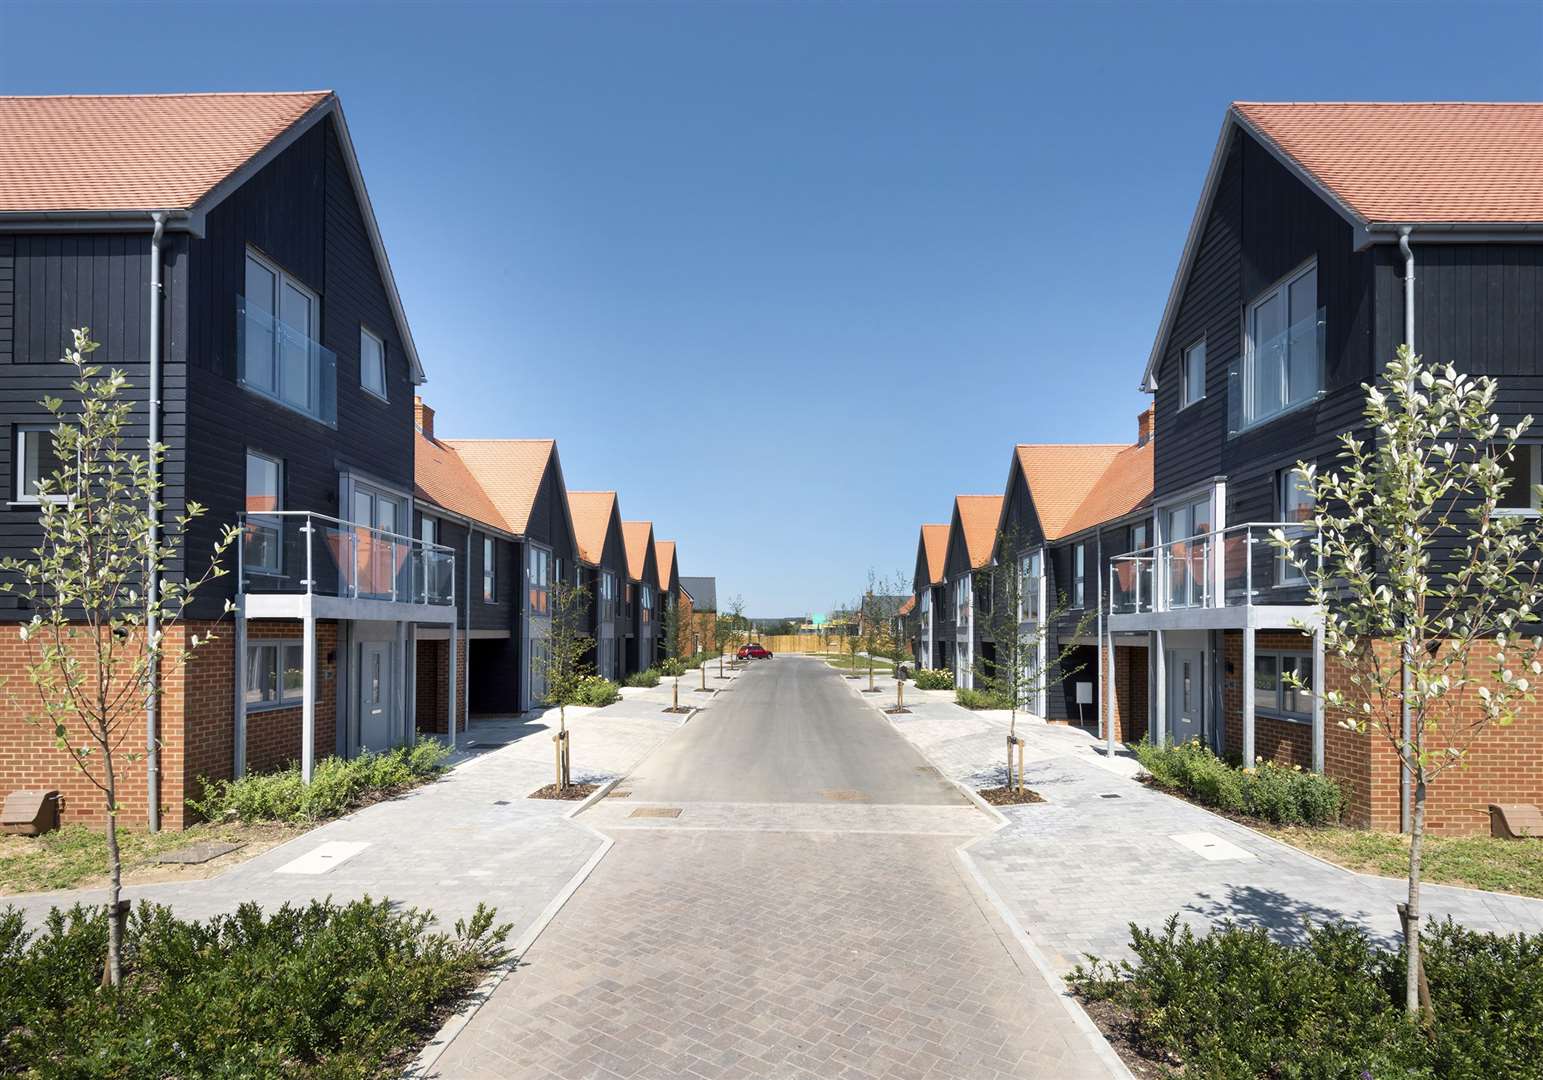 The first homes at the development were completed in 2018